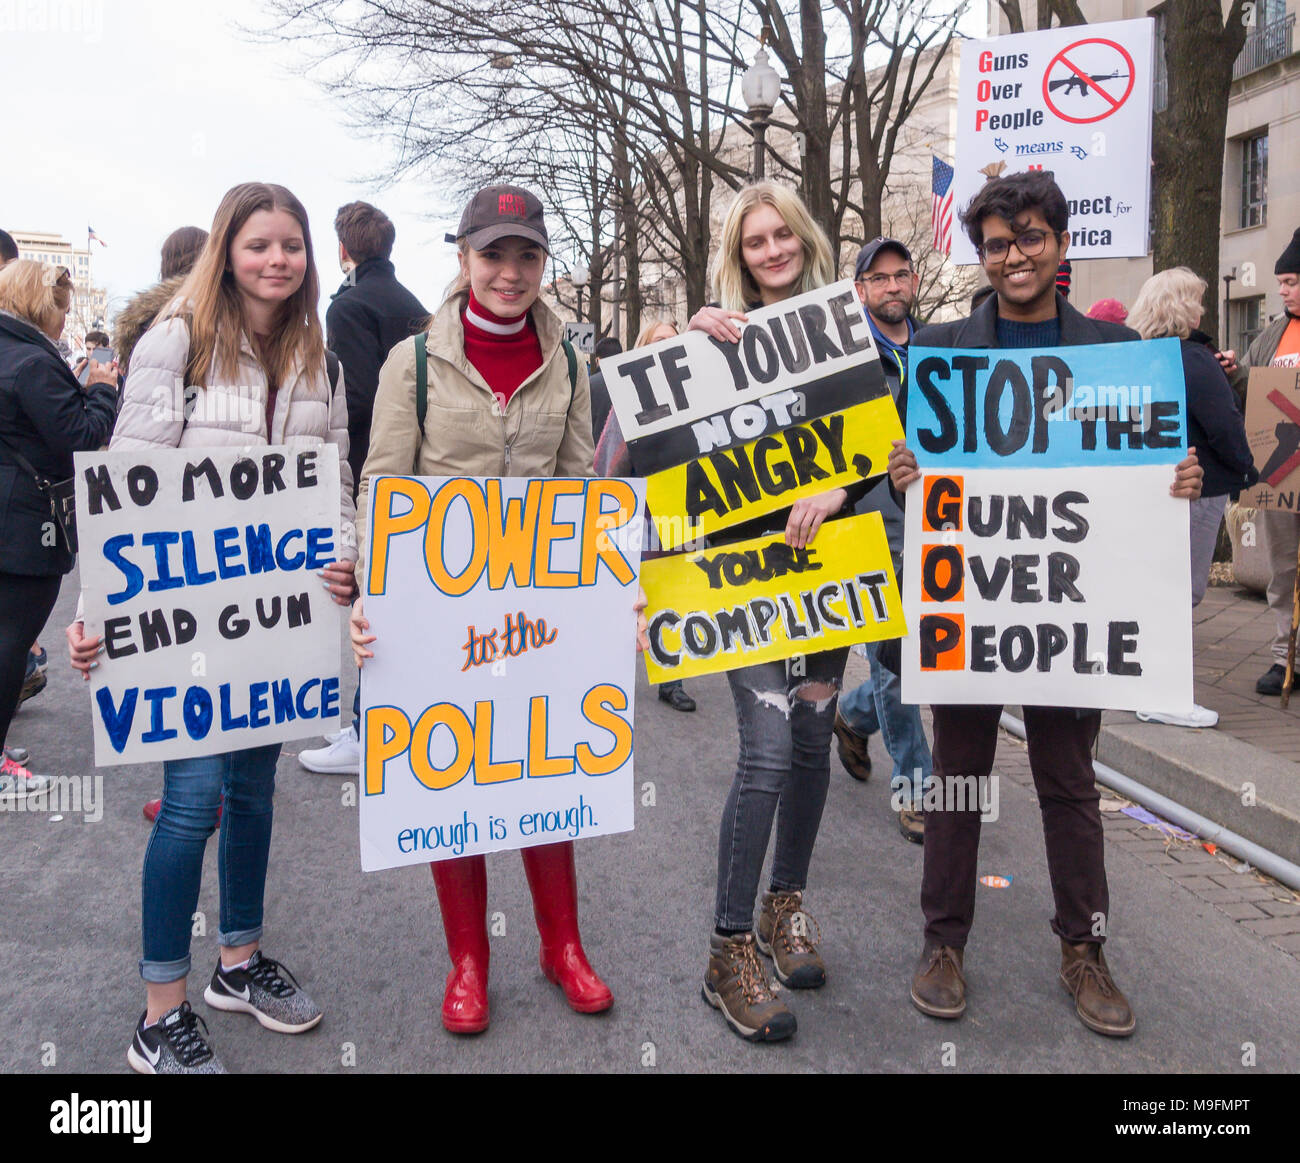 WASHINGTON, DC, USA - Young protestors at March for Our Lives demonstration, protesting gun violence. Stock Photo